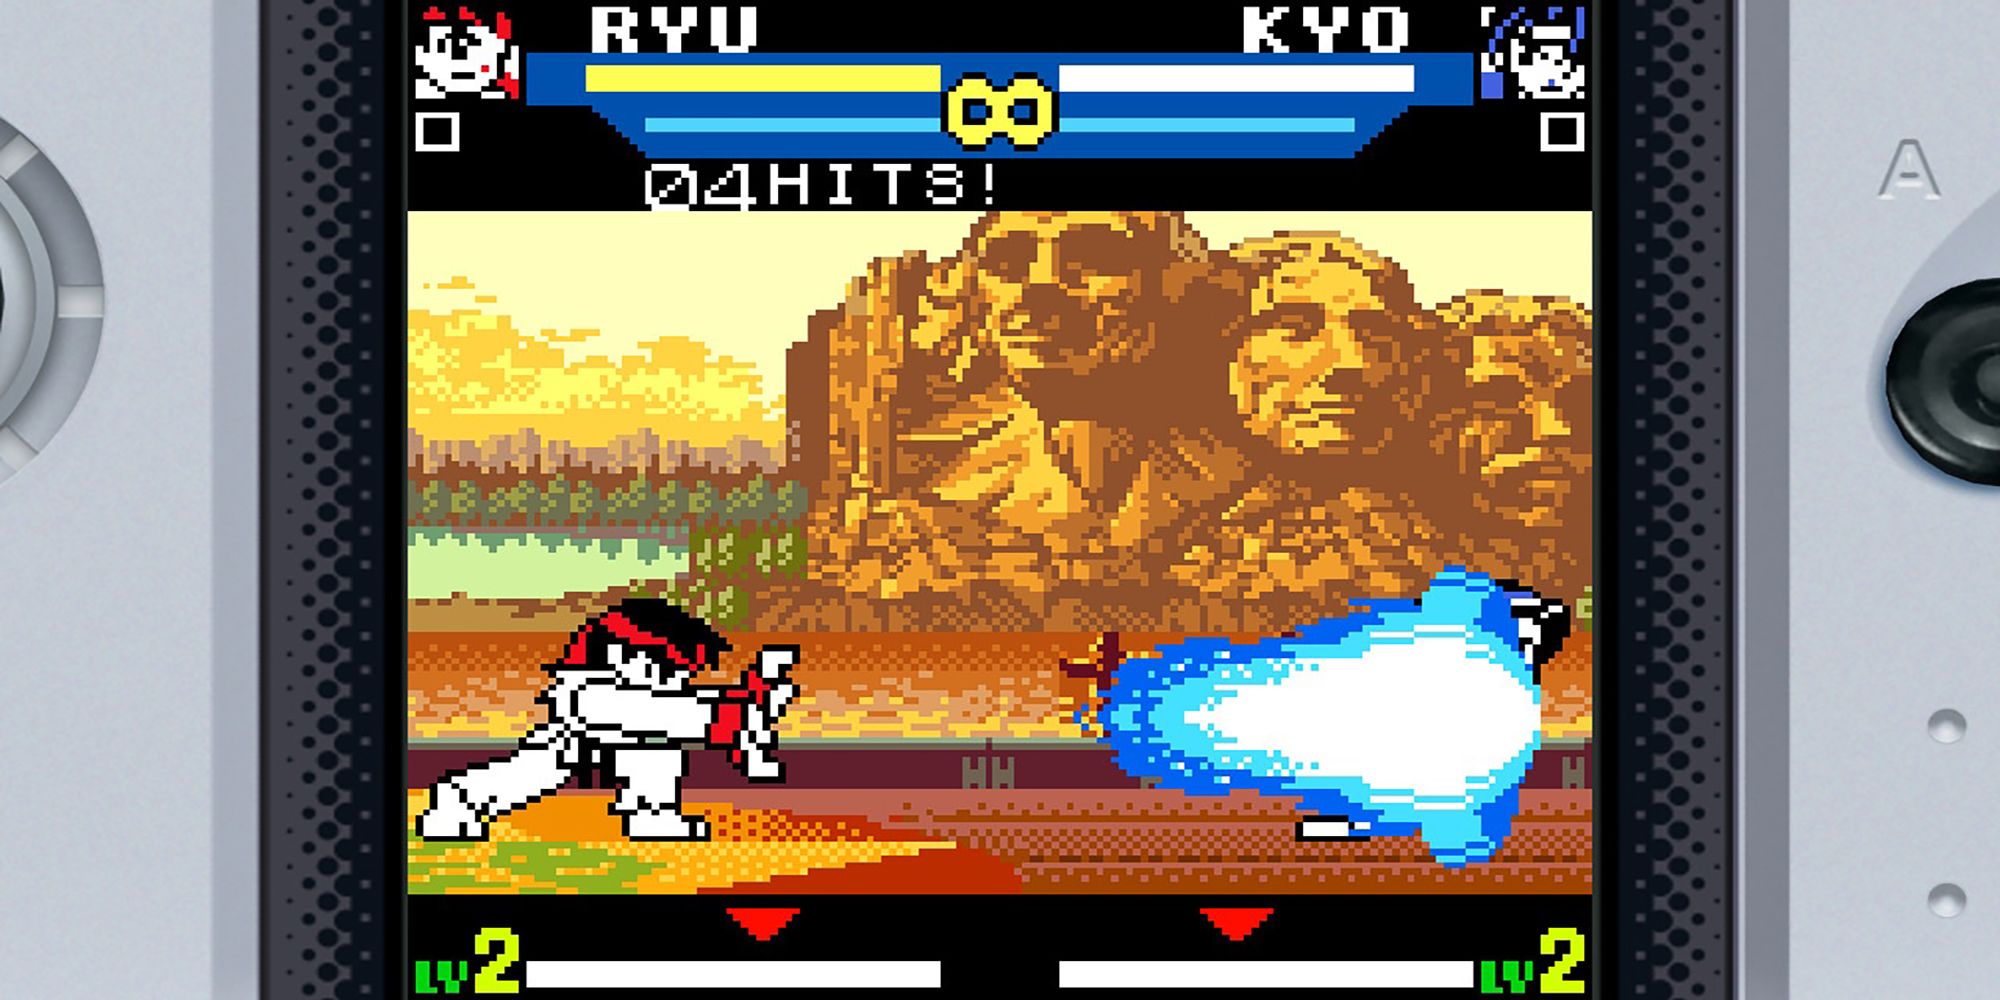 Ryu hits Kyo with a Shinku Hadoken in a battle in front of Mount Rushmore in SNK vs Capcom: The Match Of The Millennium.